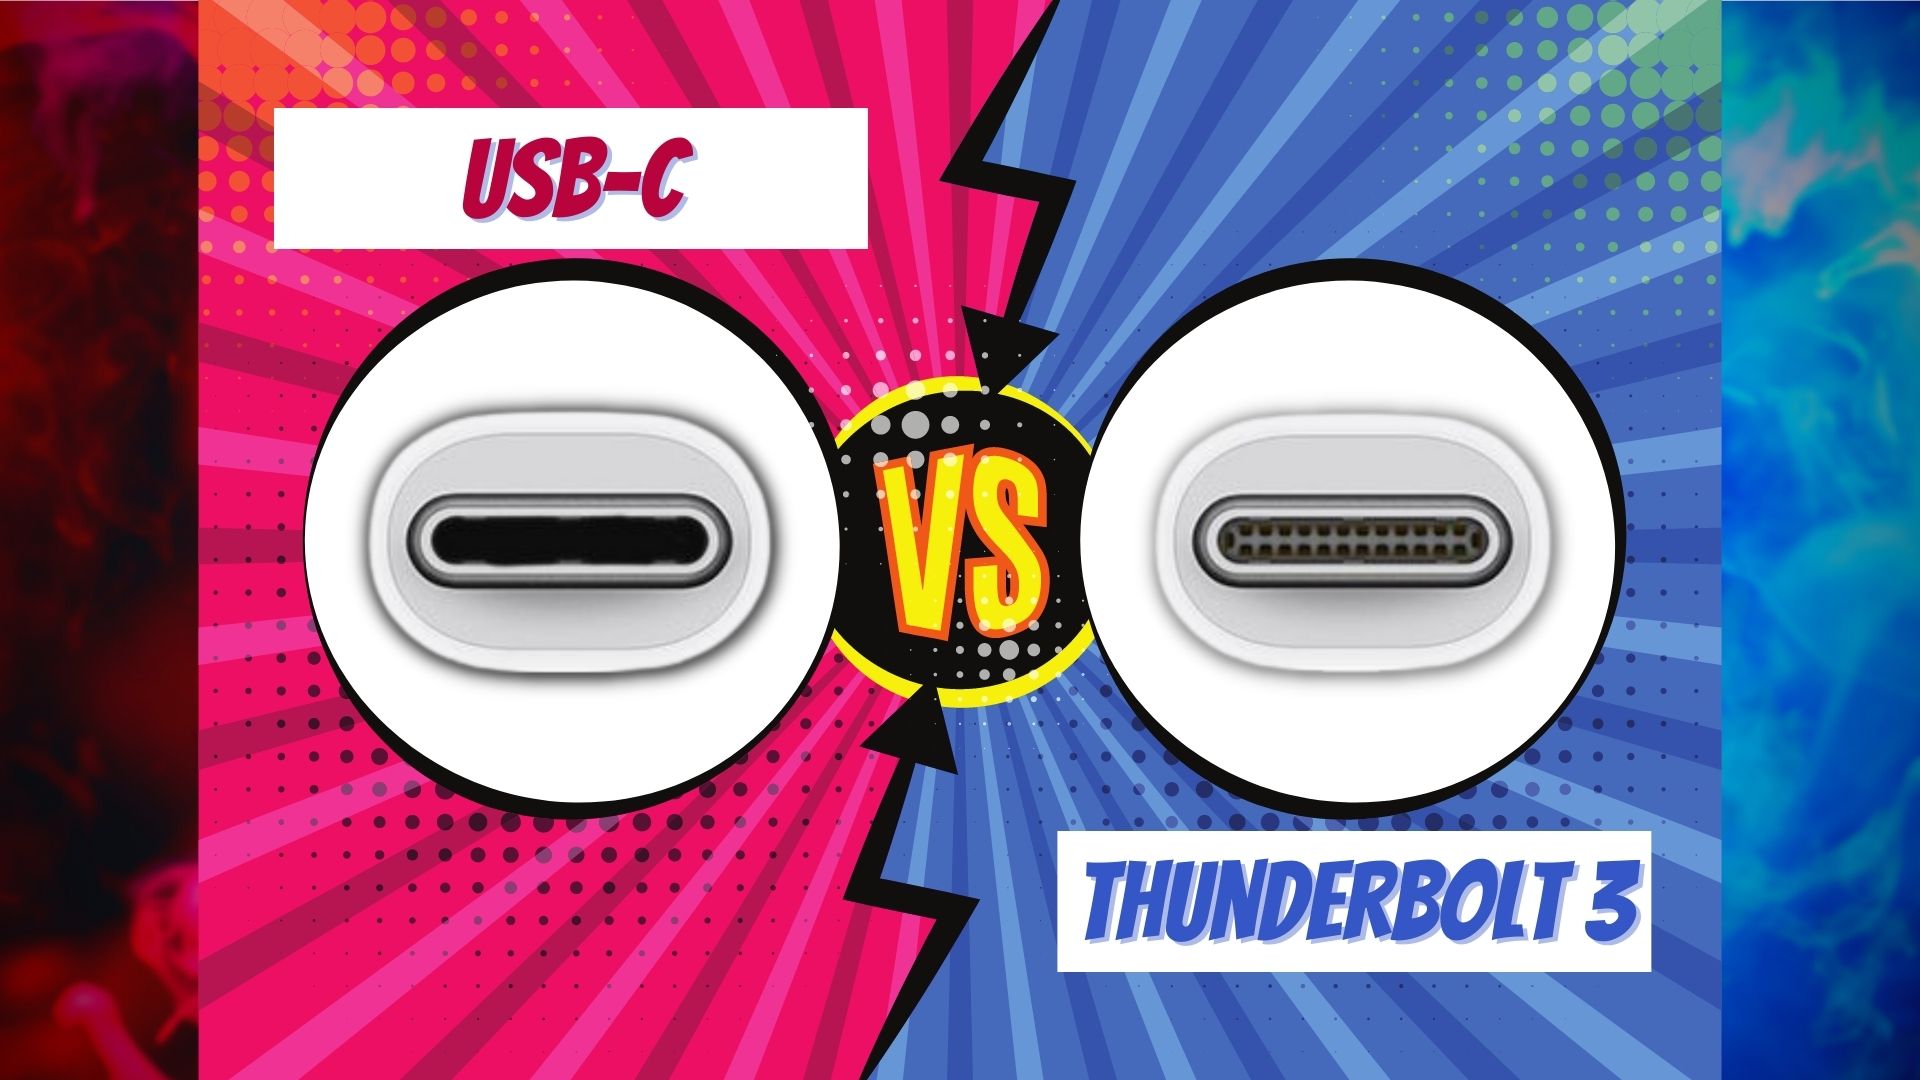 Inhibere sneen kæde Thunderbolt 3 Vs. USB-C: What's The Difference?